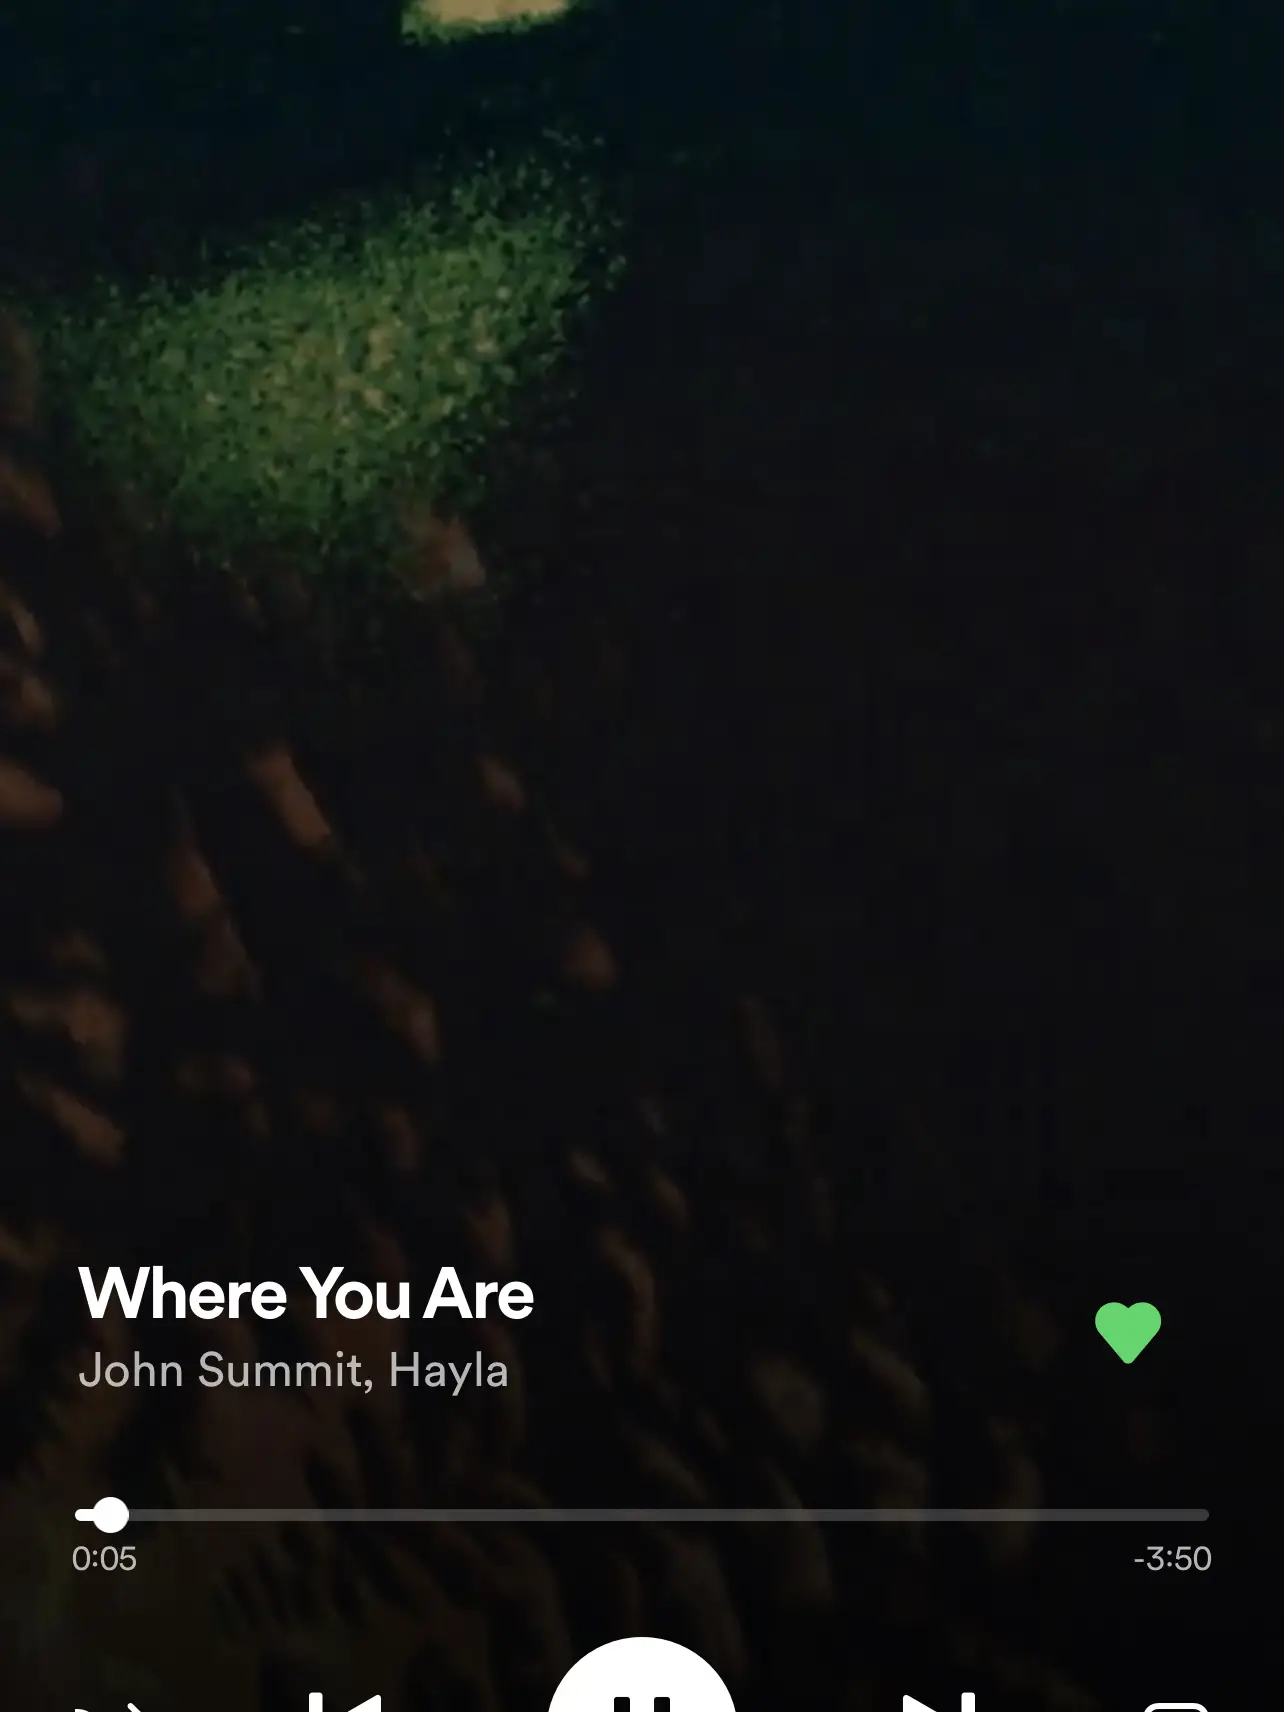  A song by John Summit with the words "Where You Are" at the top.